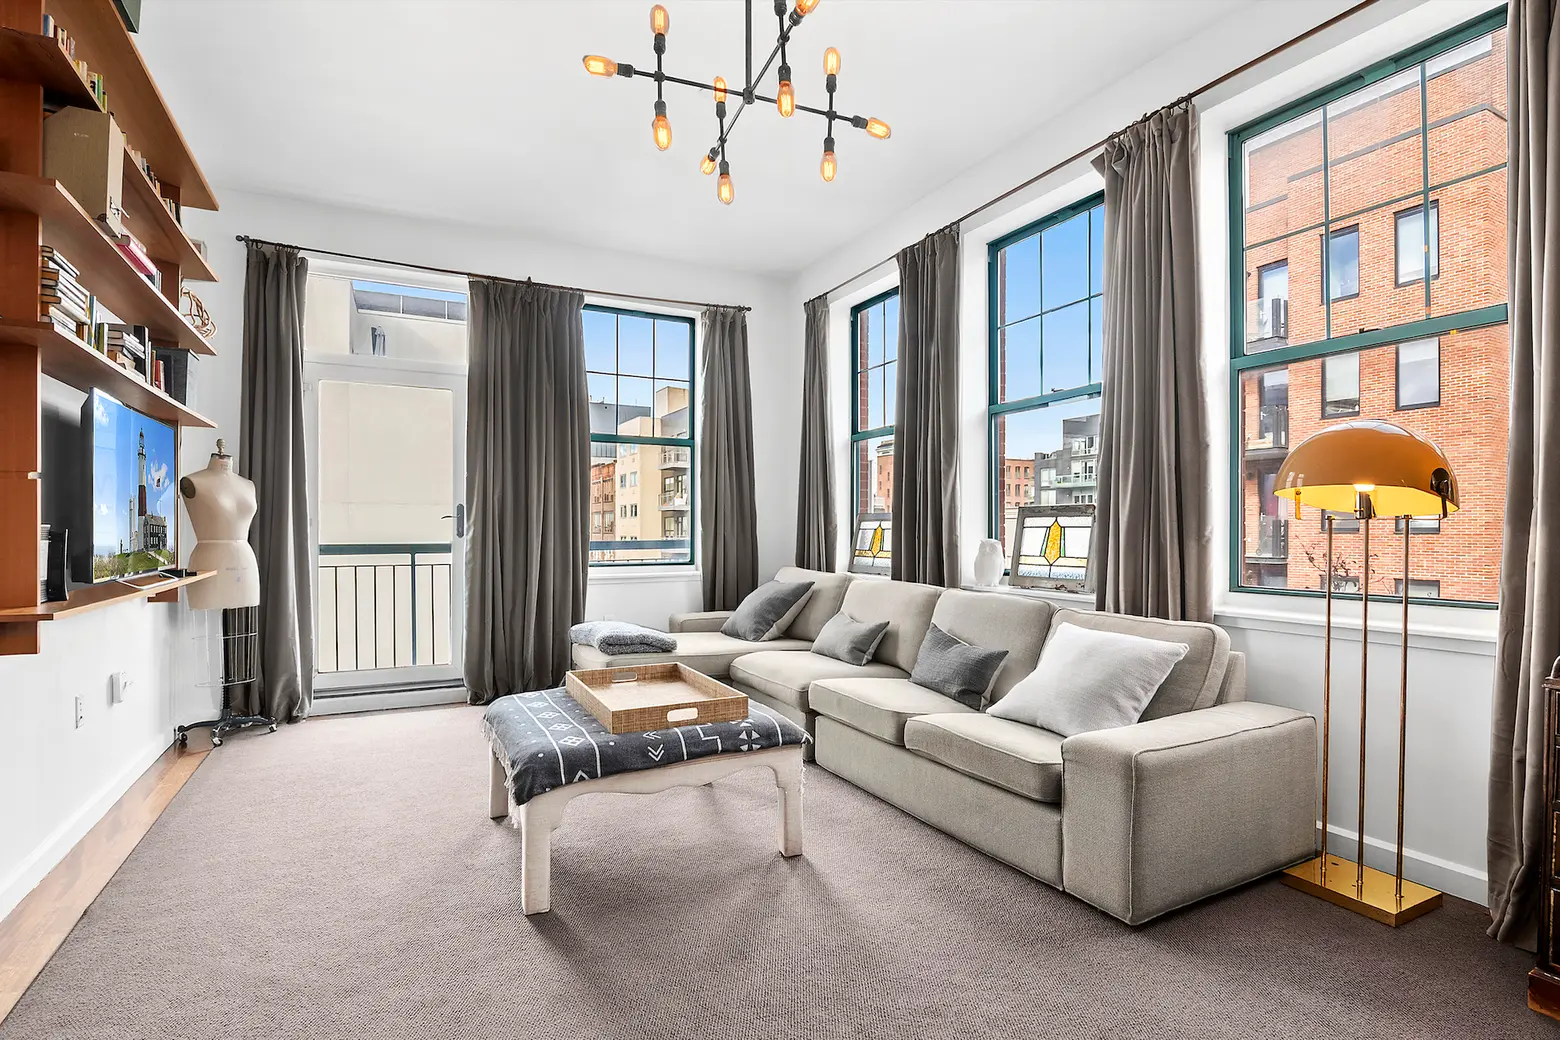 For $895K, this one-bedroom condo in the heart of Williamsburg isn’t missing a thing